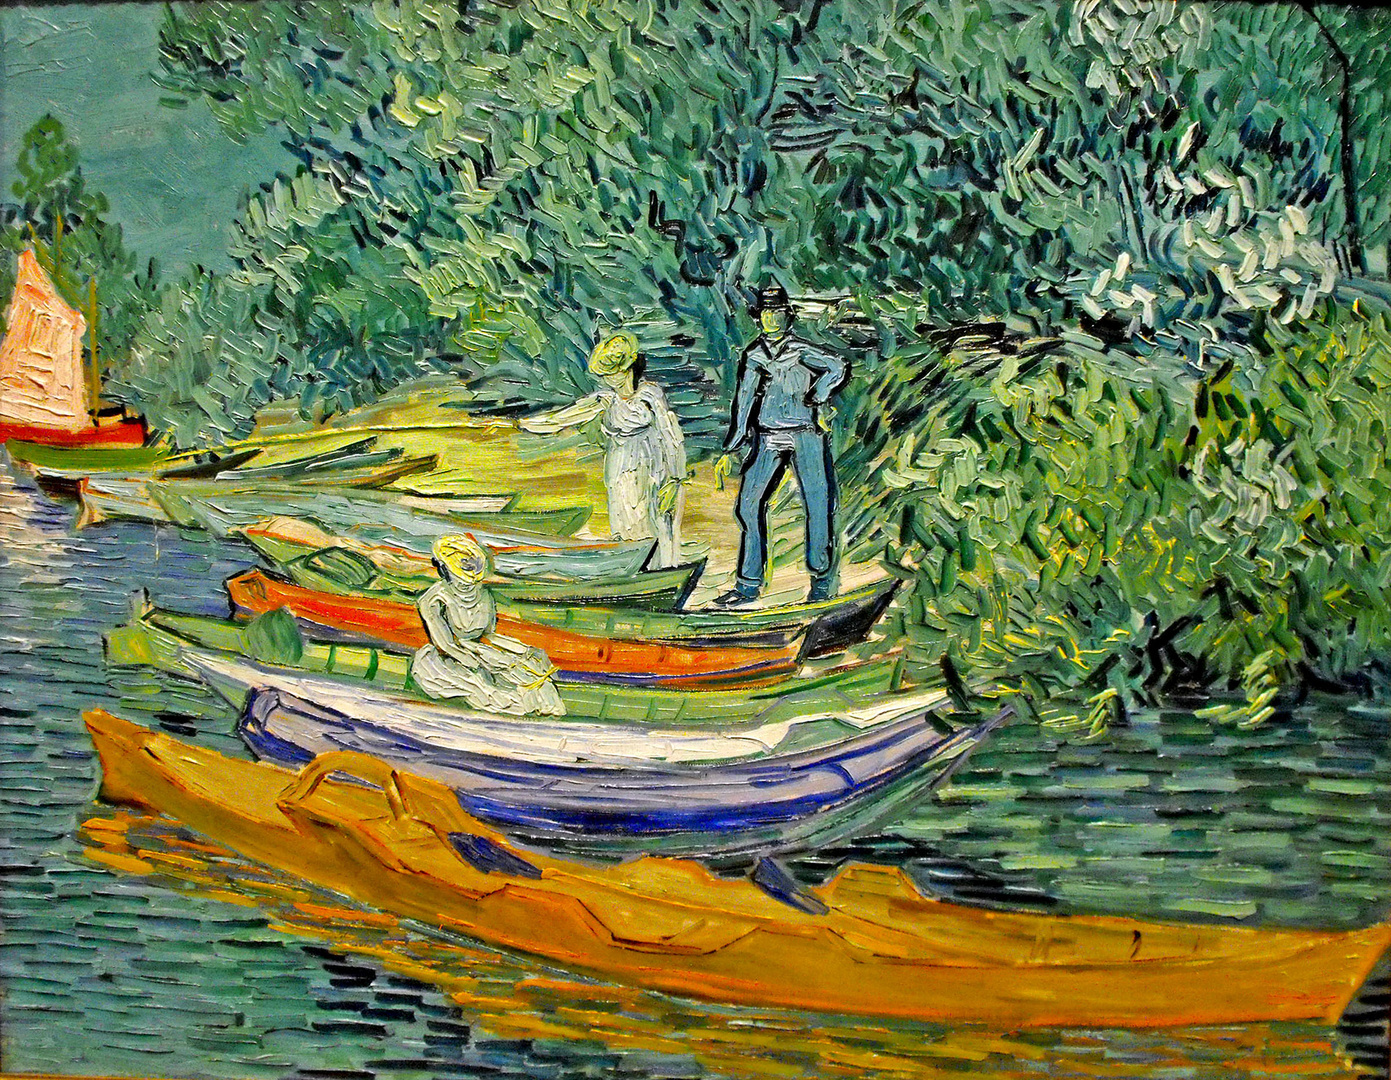 Vincent Willem van Gogh, Bank of the Oise at Auvers, 1890